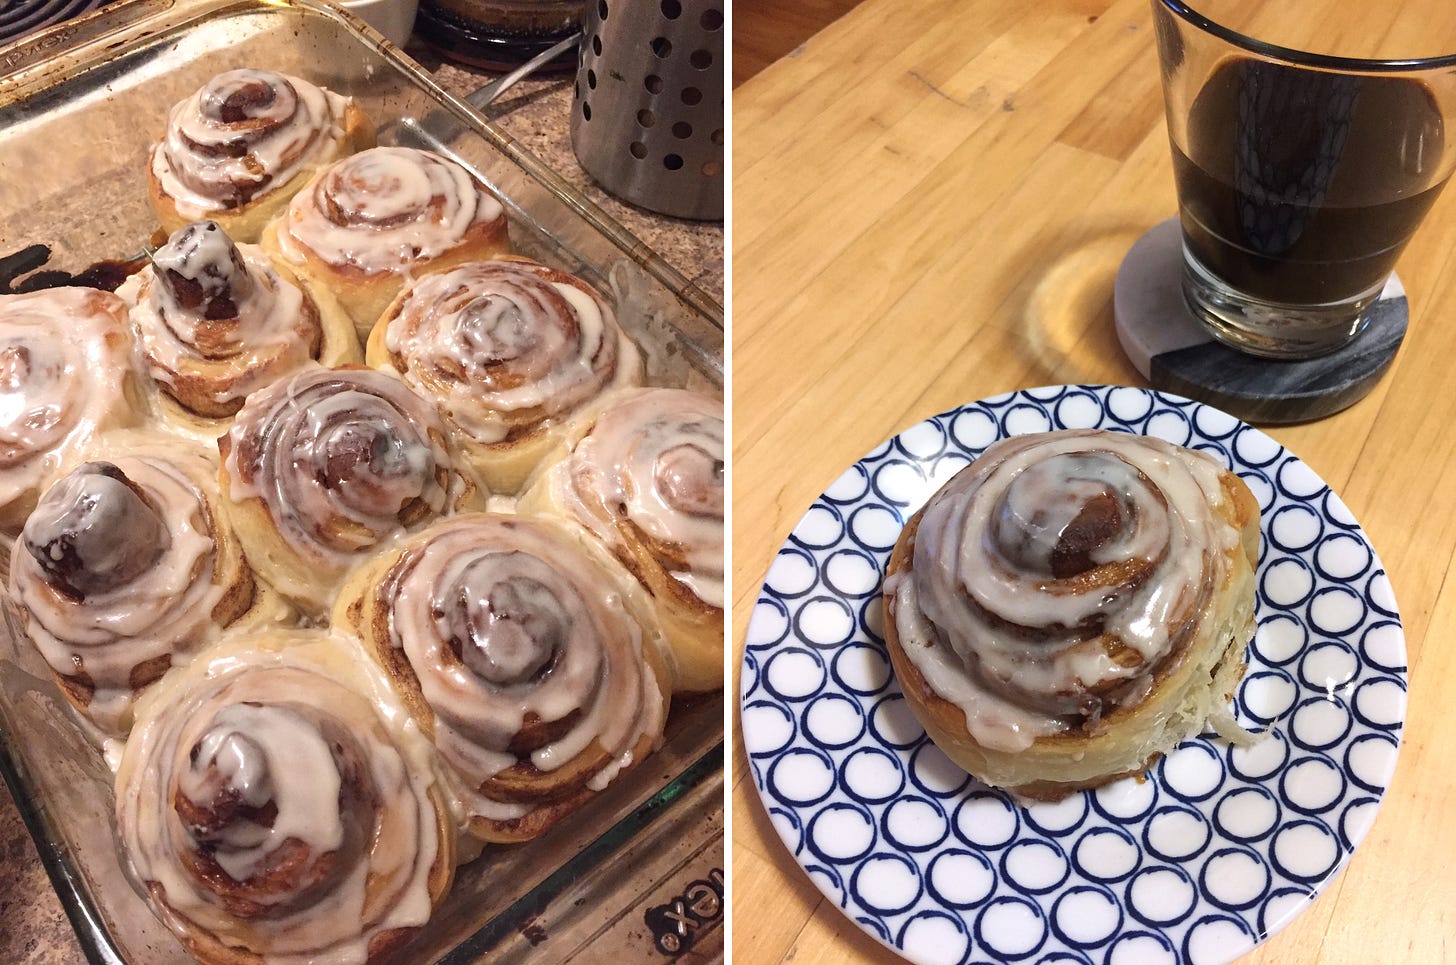 Left image: a pan of cinnamon buns with white icing melting overtop. Right image: one of the buns on a blue and white printed plate, with a glass of dark beer to the side.